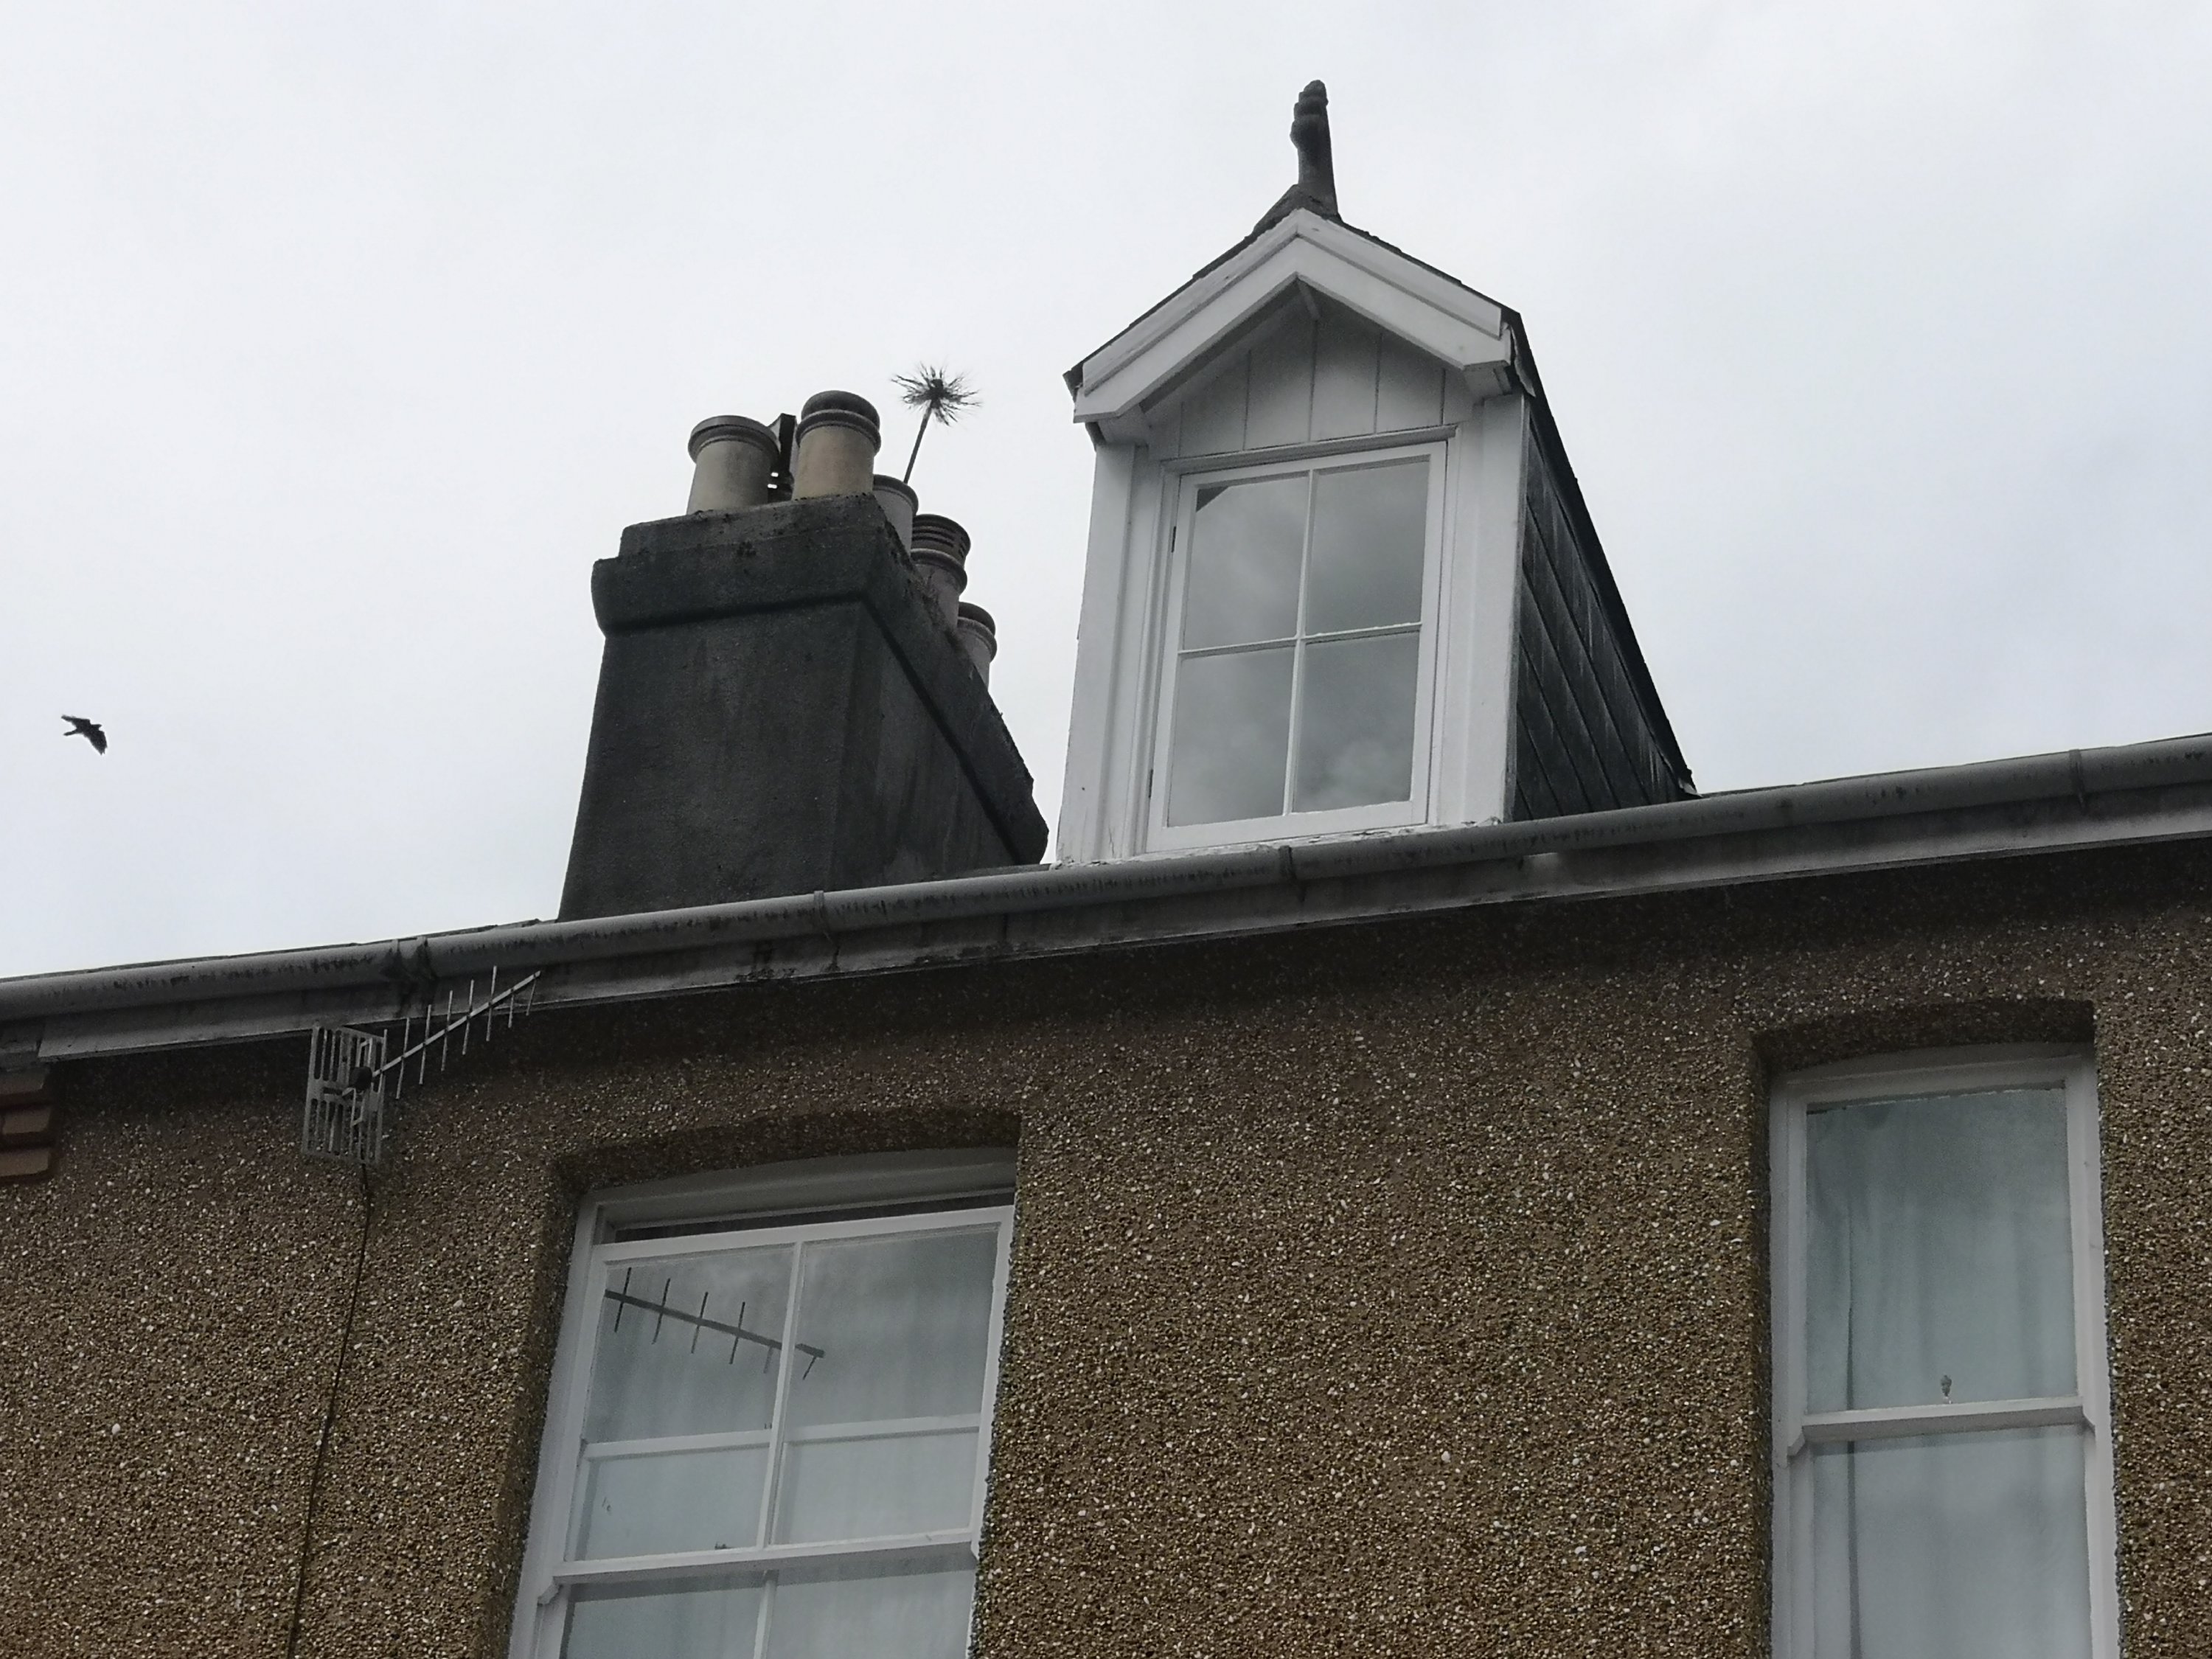 Hodgsons Chimney Sweeps, Chimney Sweeping and Smoke Testing an open fire in Teignmouth